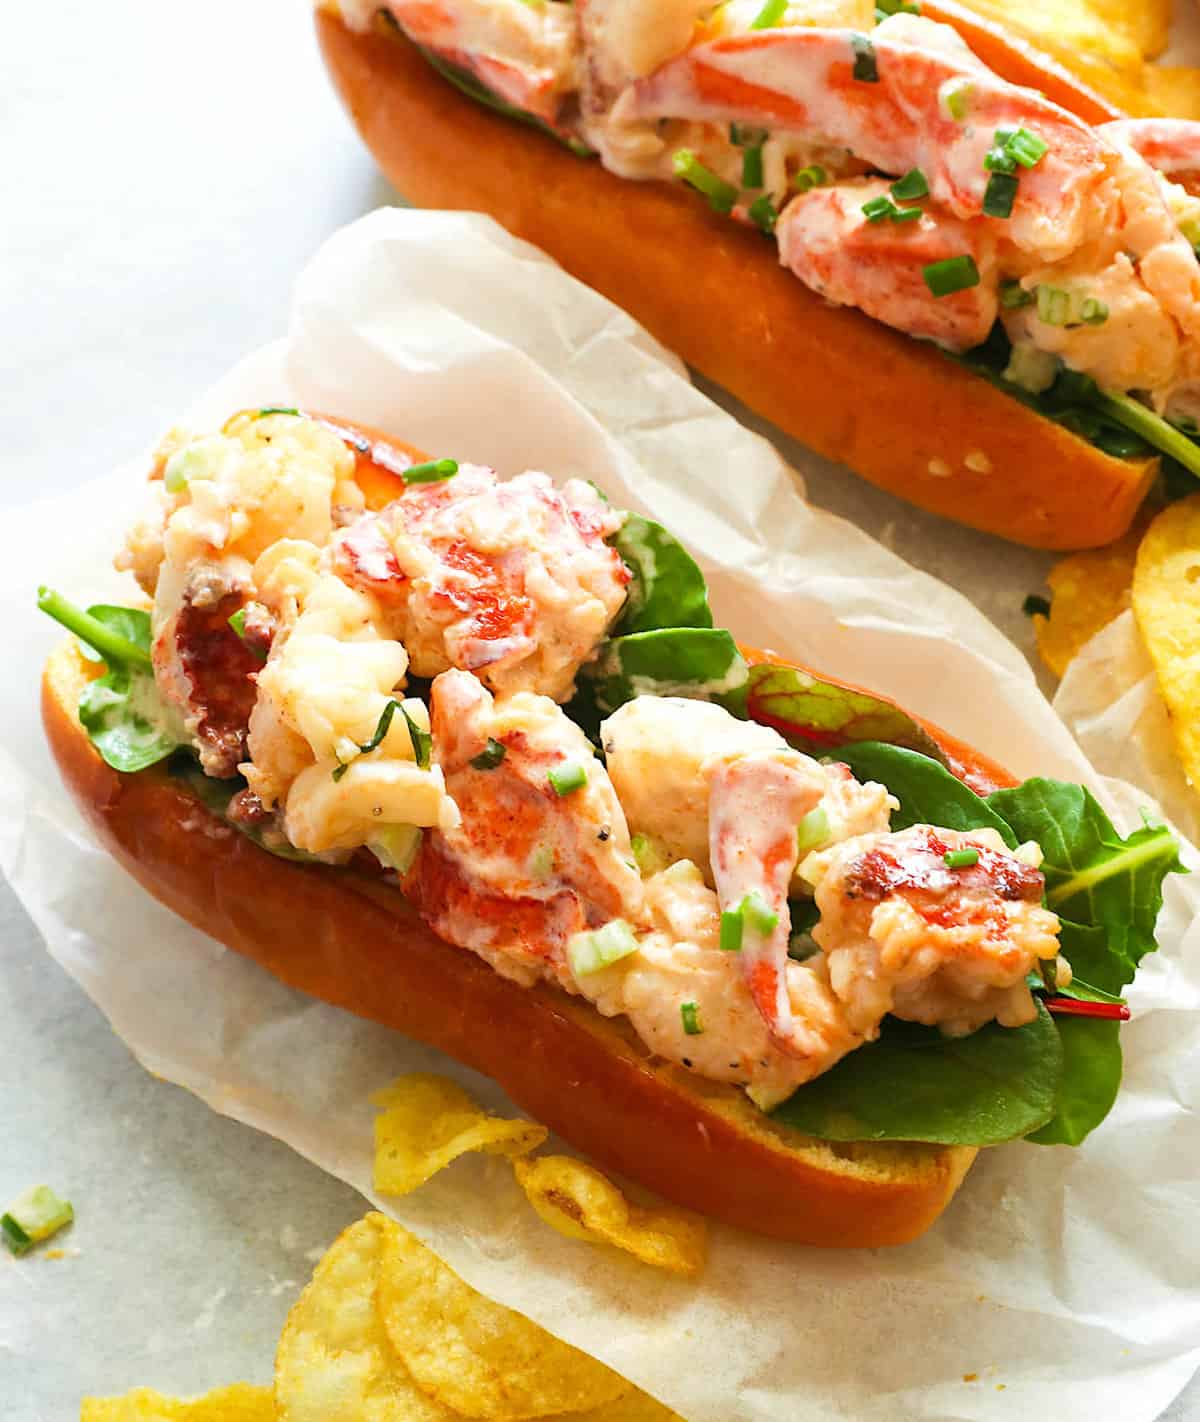 Drool-worthy lobster rolls ready to wrap and roll